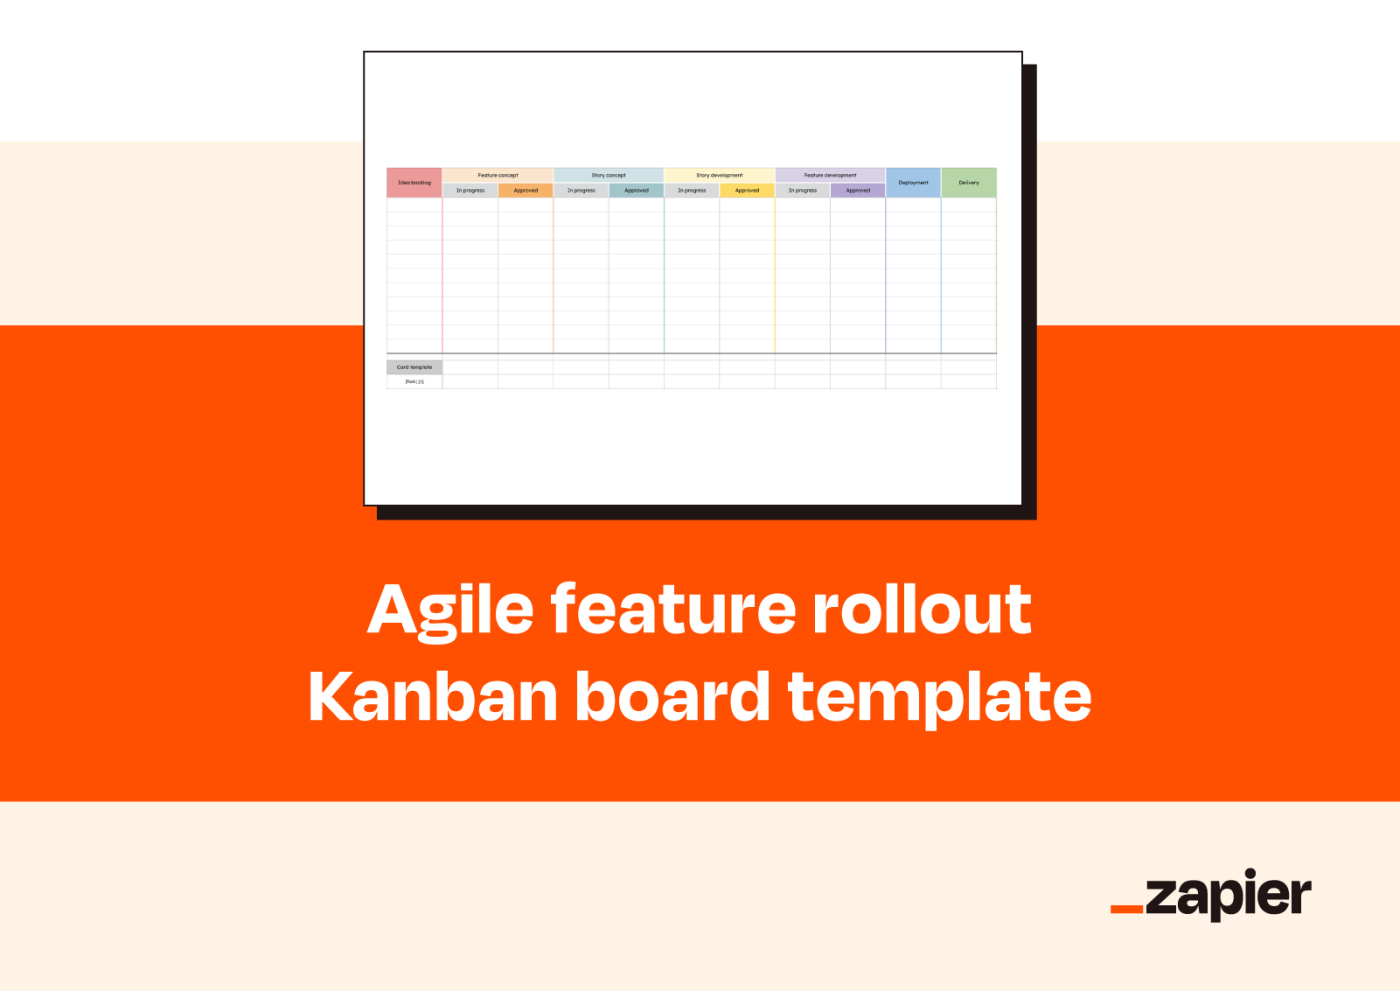 Graphic reading Agile feature rollout Kanban board template with screenshot of the template.